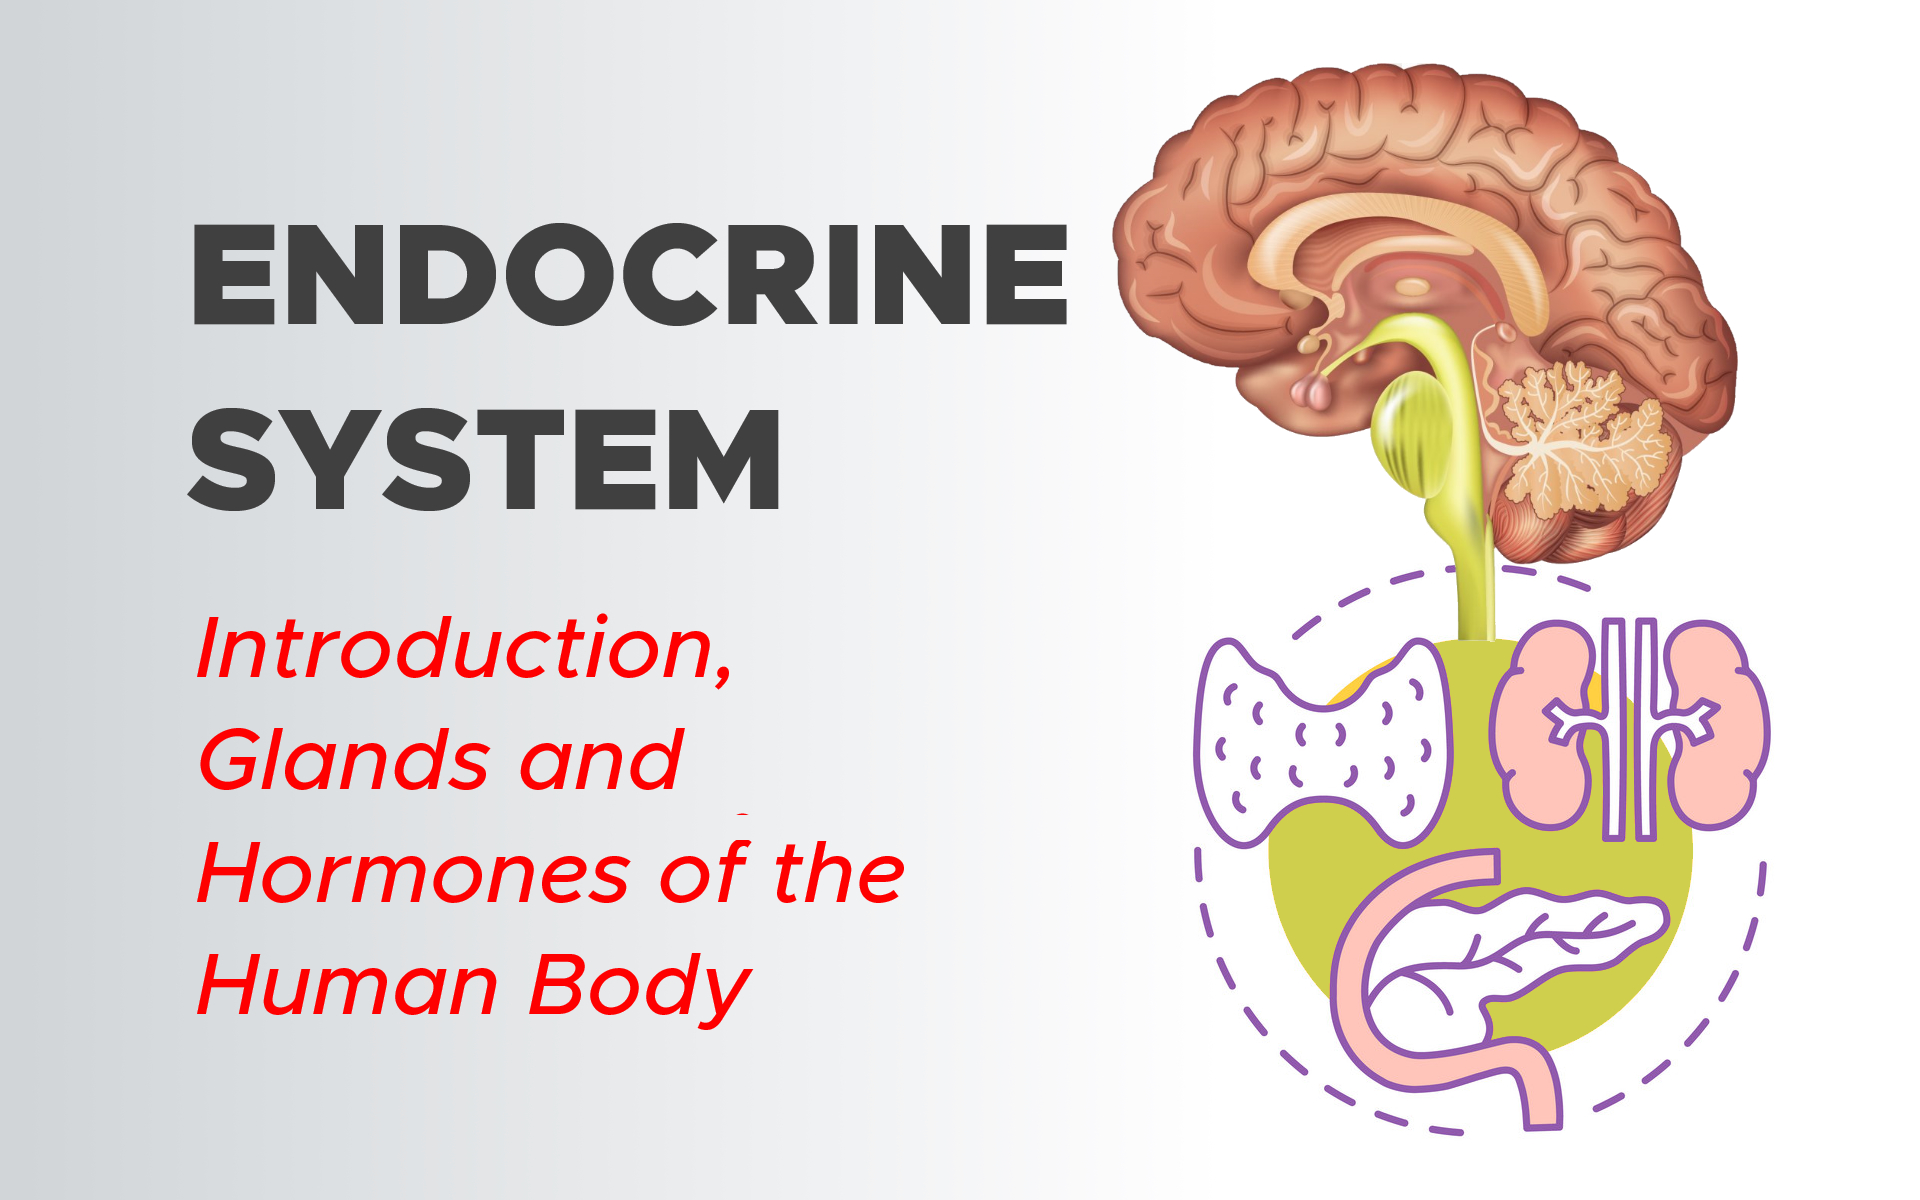 Endocrine System: Introduction, Glands and Hormones of the Human Body